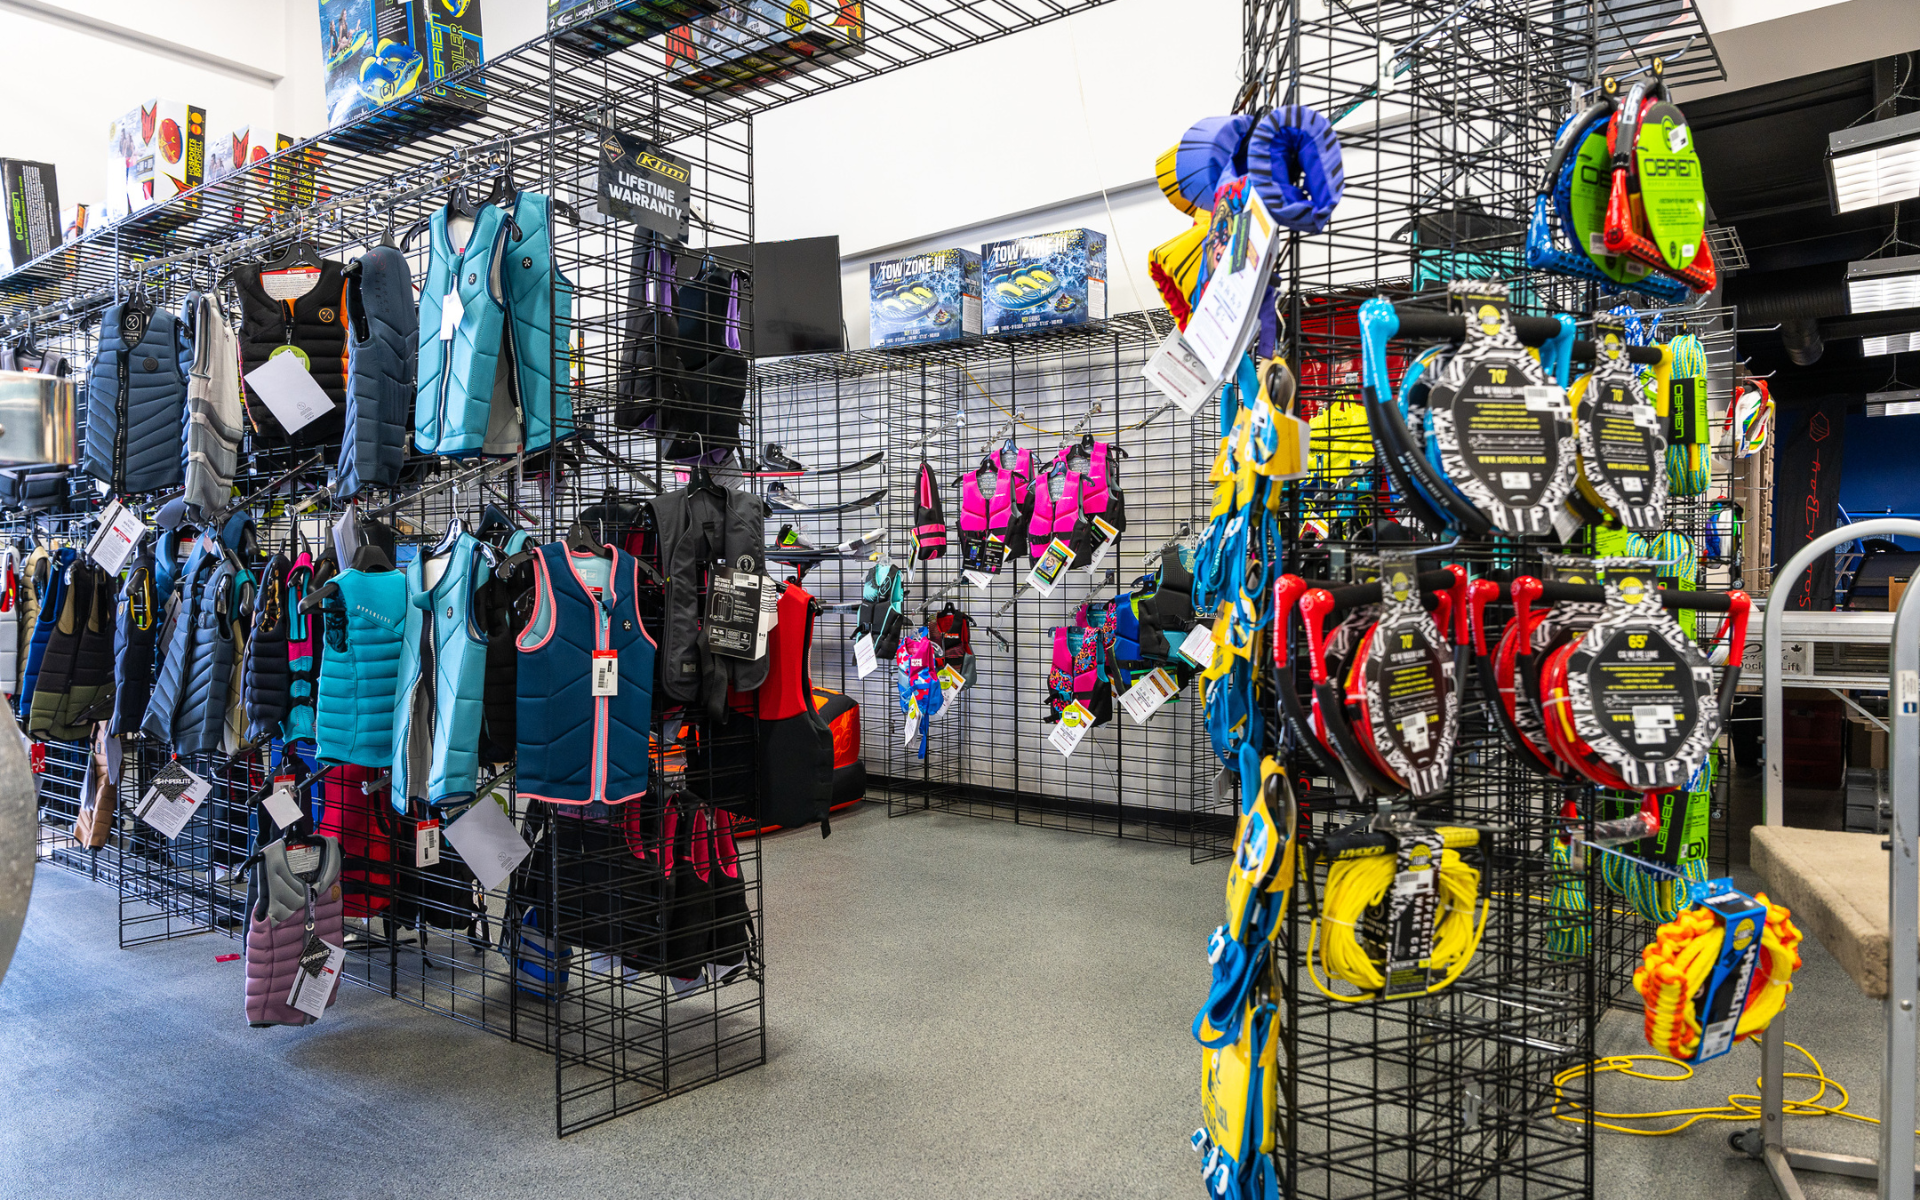 Interior of Martin Motorsports showroom in Calgary featuring clothing, gear and accessories